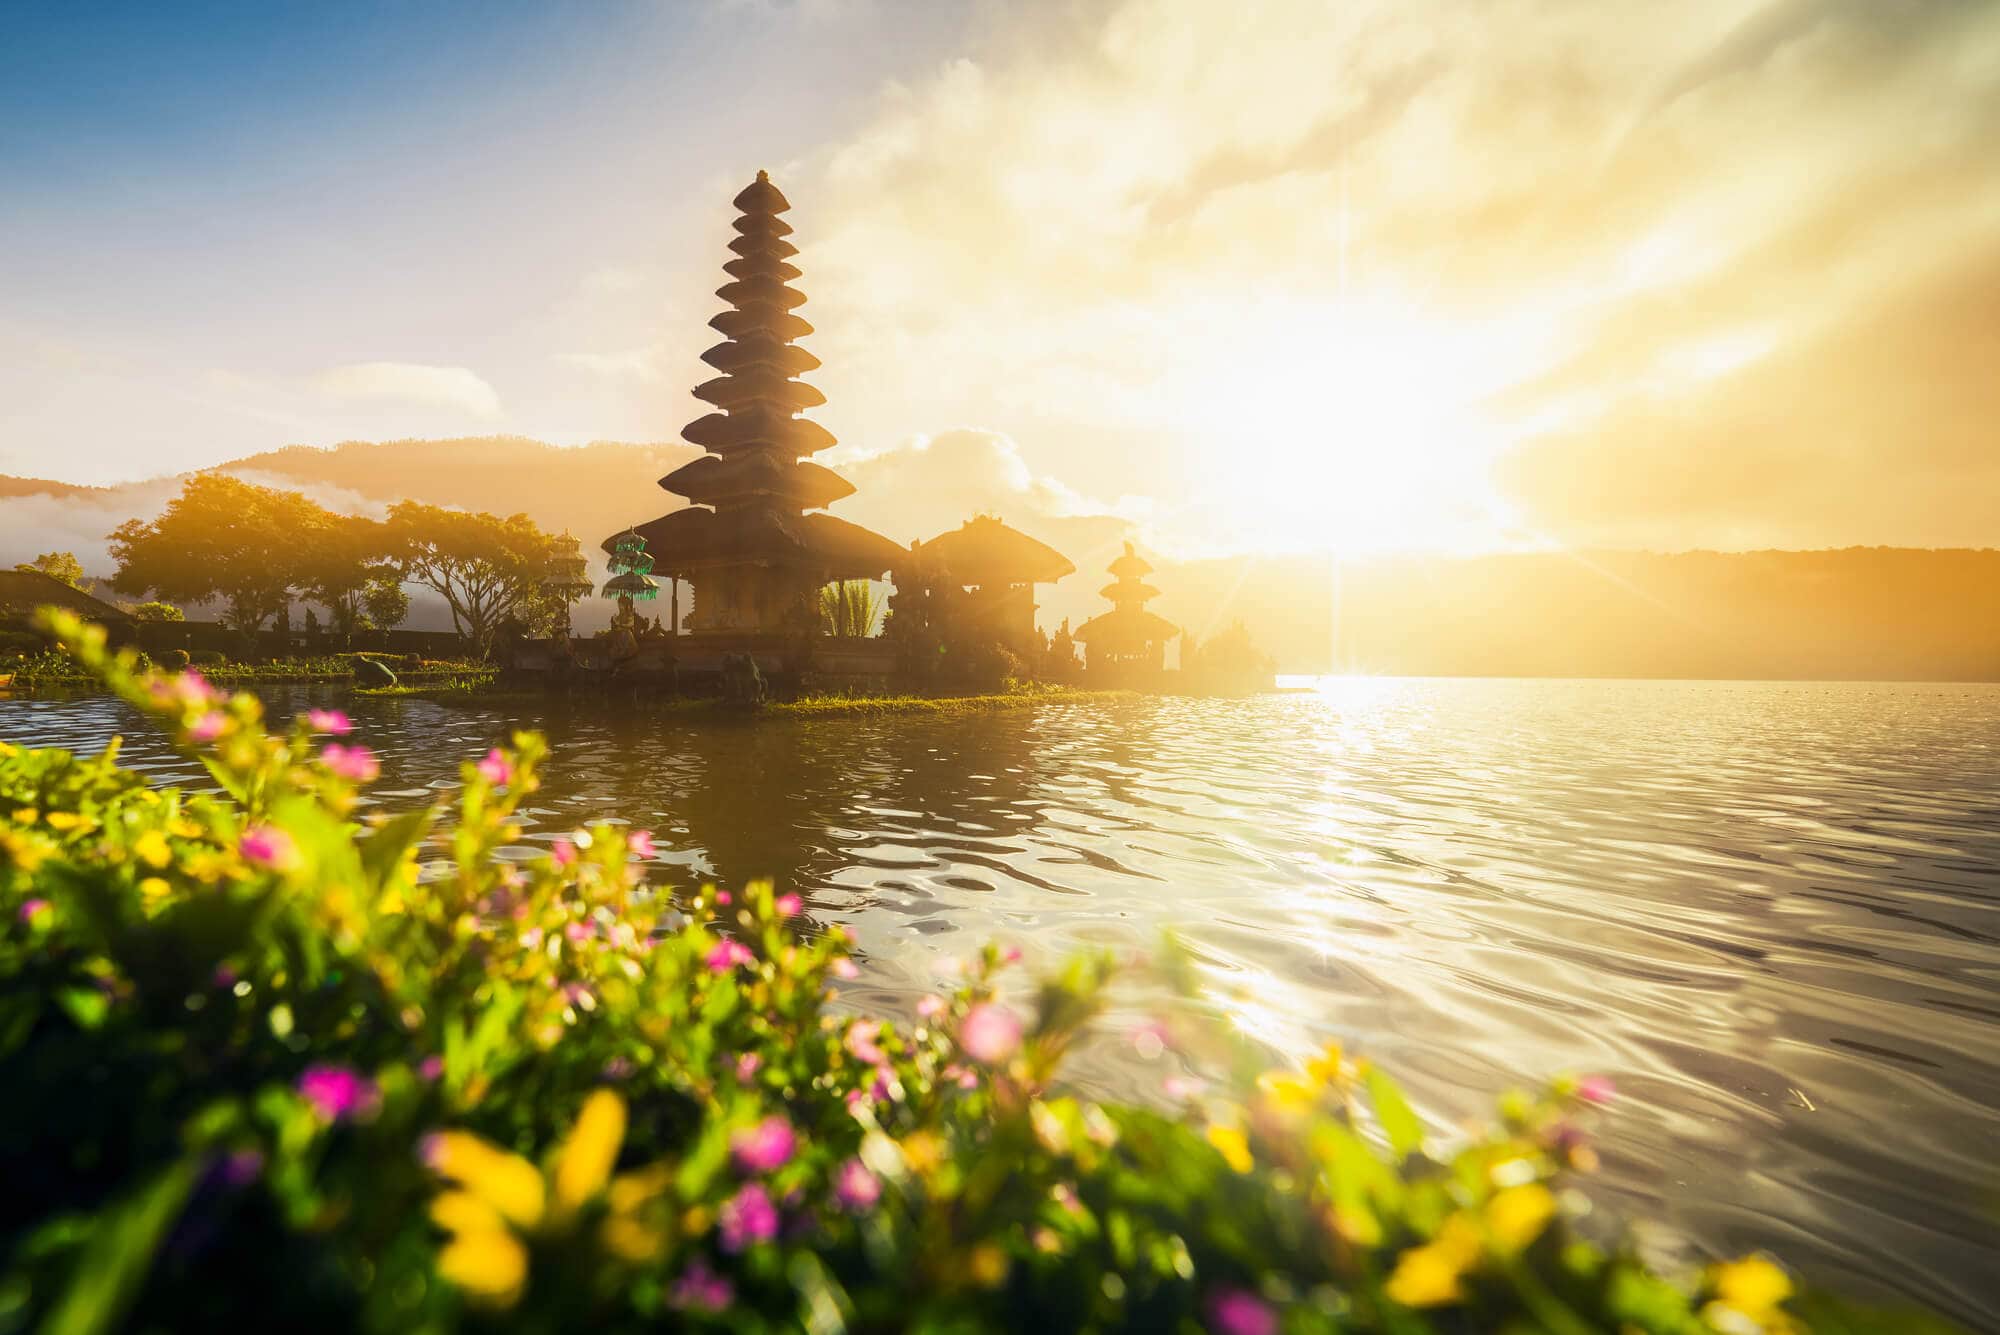 Glowing yellow sunset over Ulun Danu Beratan Temple in the middle of a lake with pink flowers in the foreground, a must on any 2-week Bali itinerary.